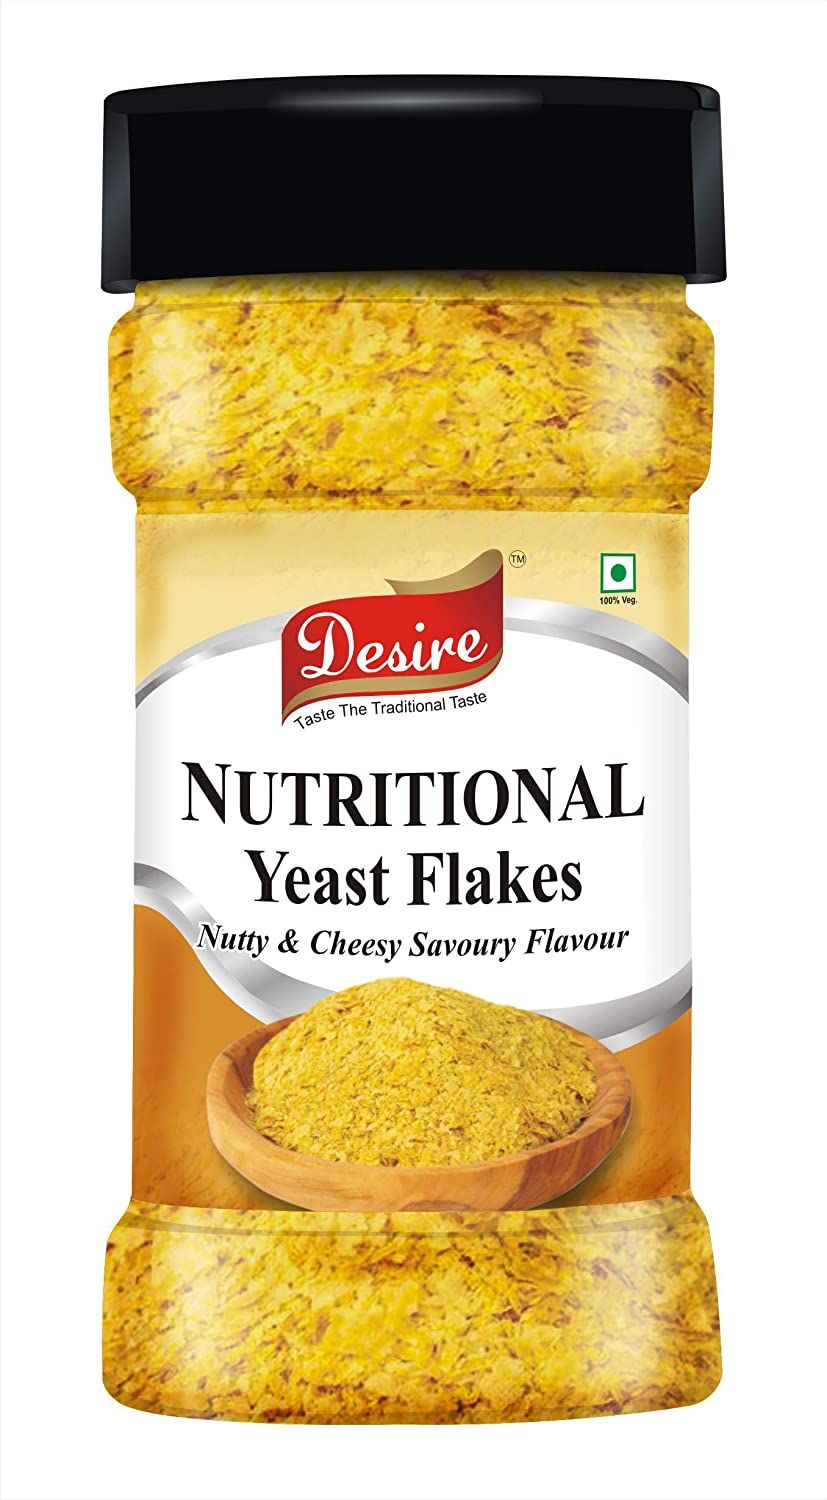 Desire Nutritional Yeast Flakes Image